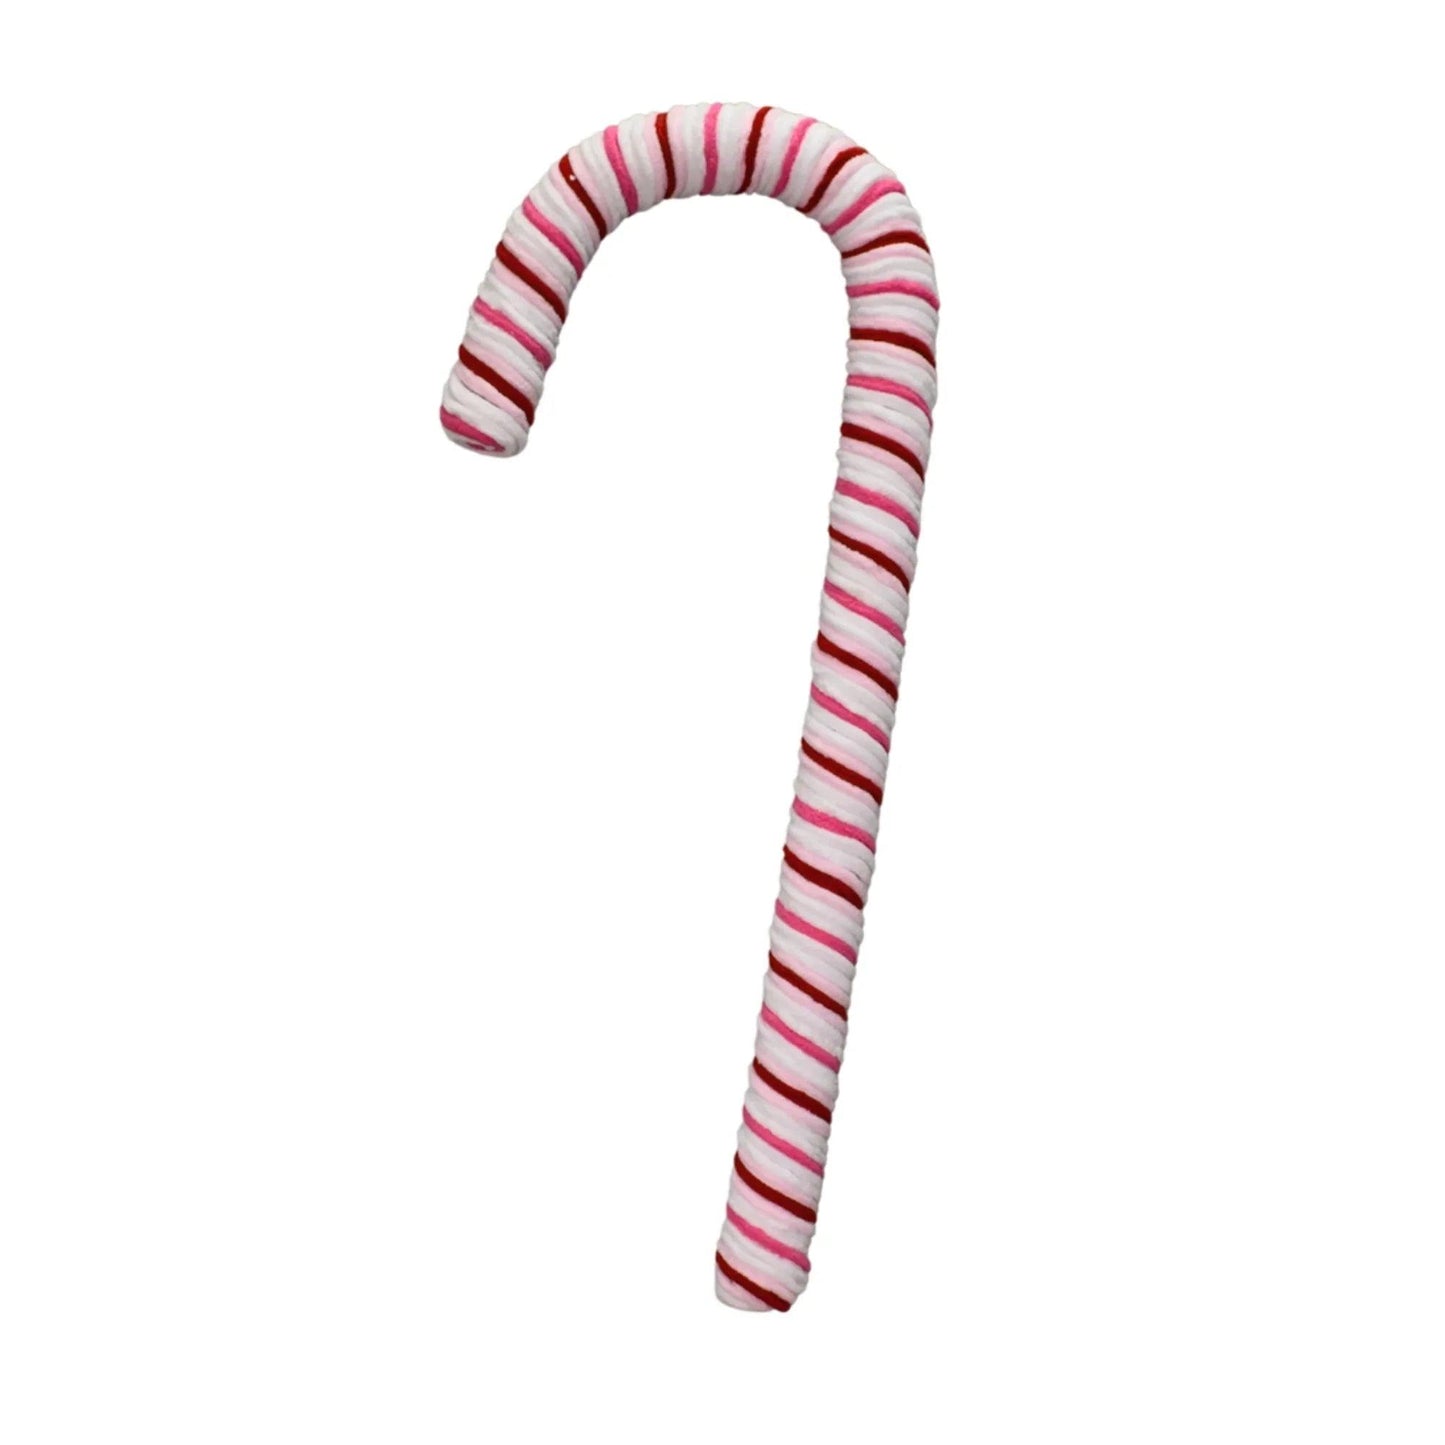 Chenille Peppermint Christmas Candy Cane 24in - Pink/Red/White - Burlap and Bling Decor